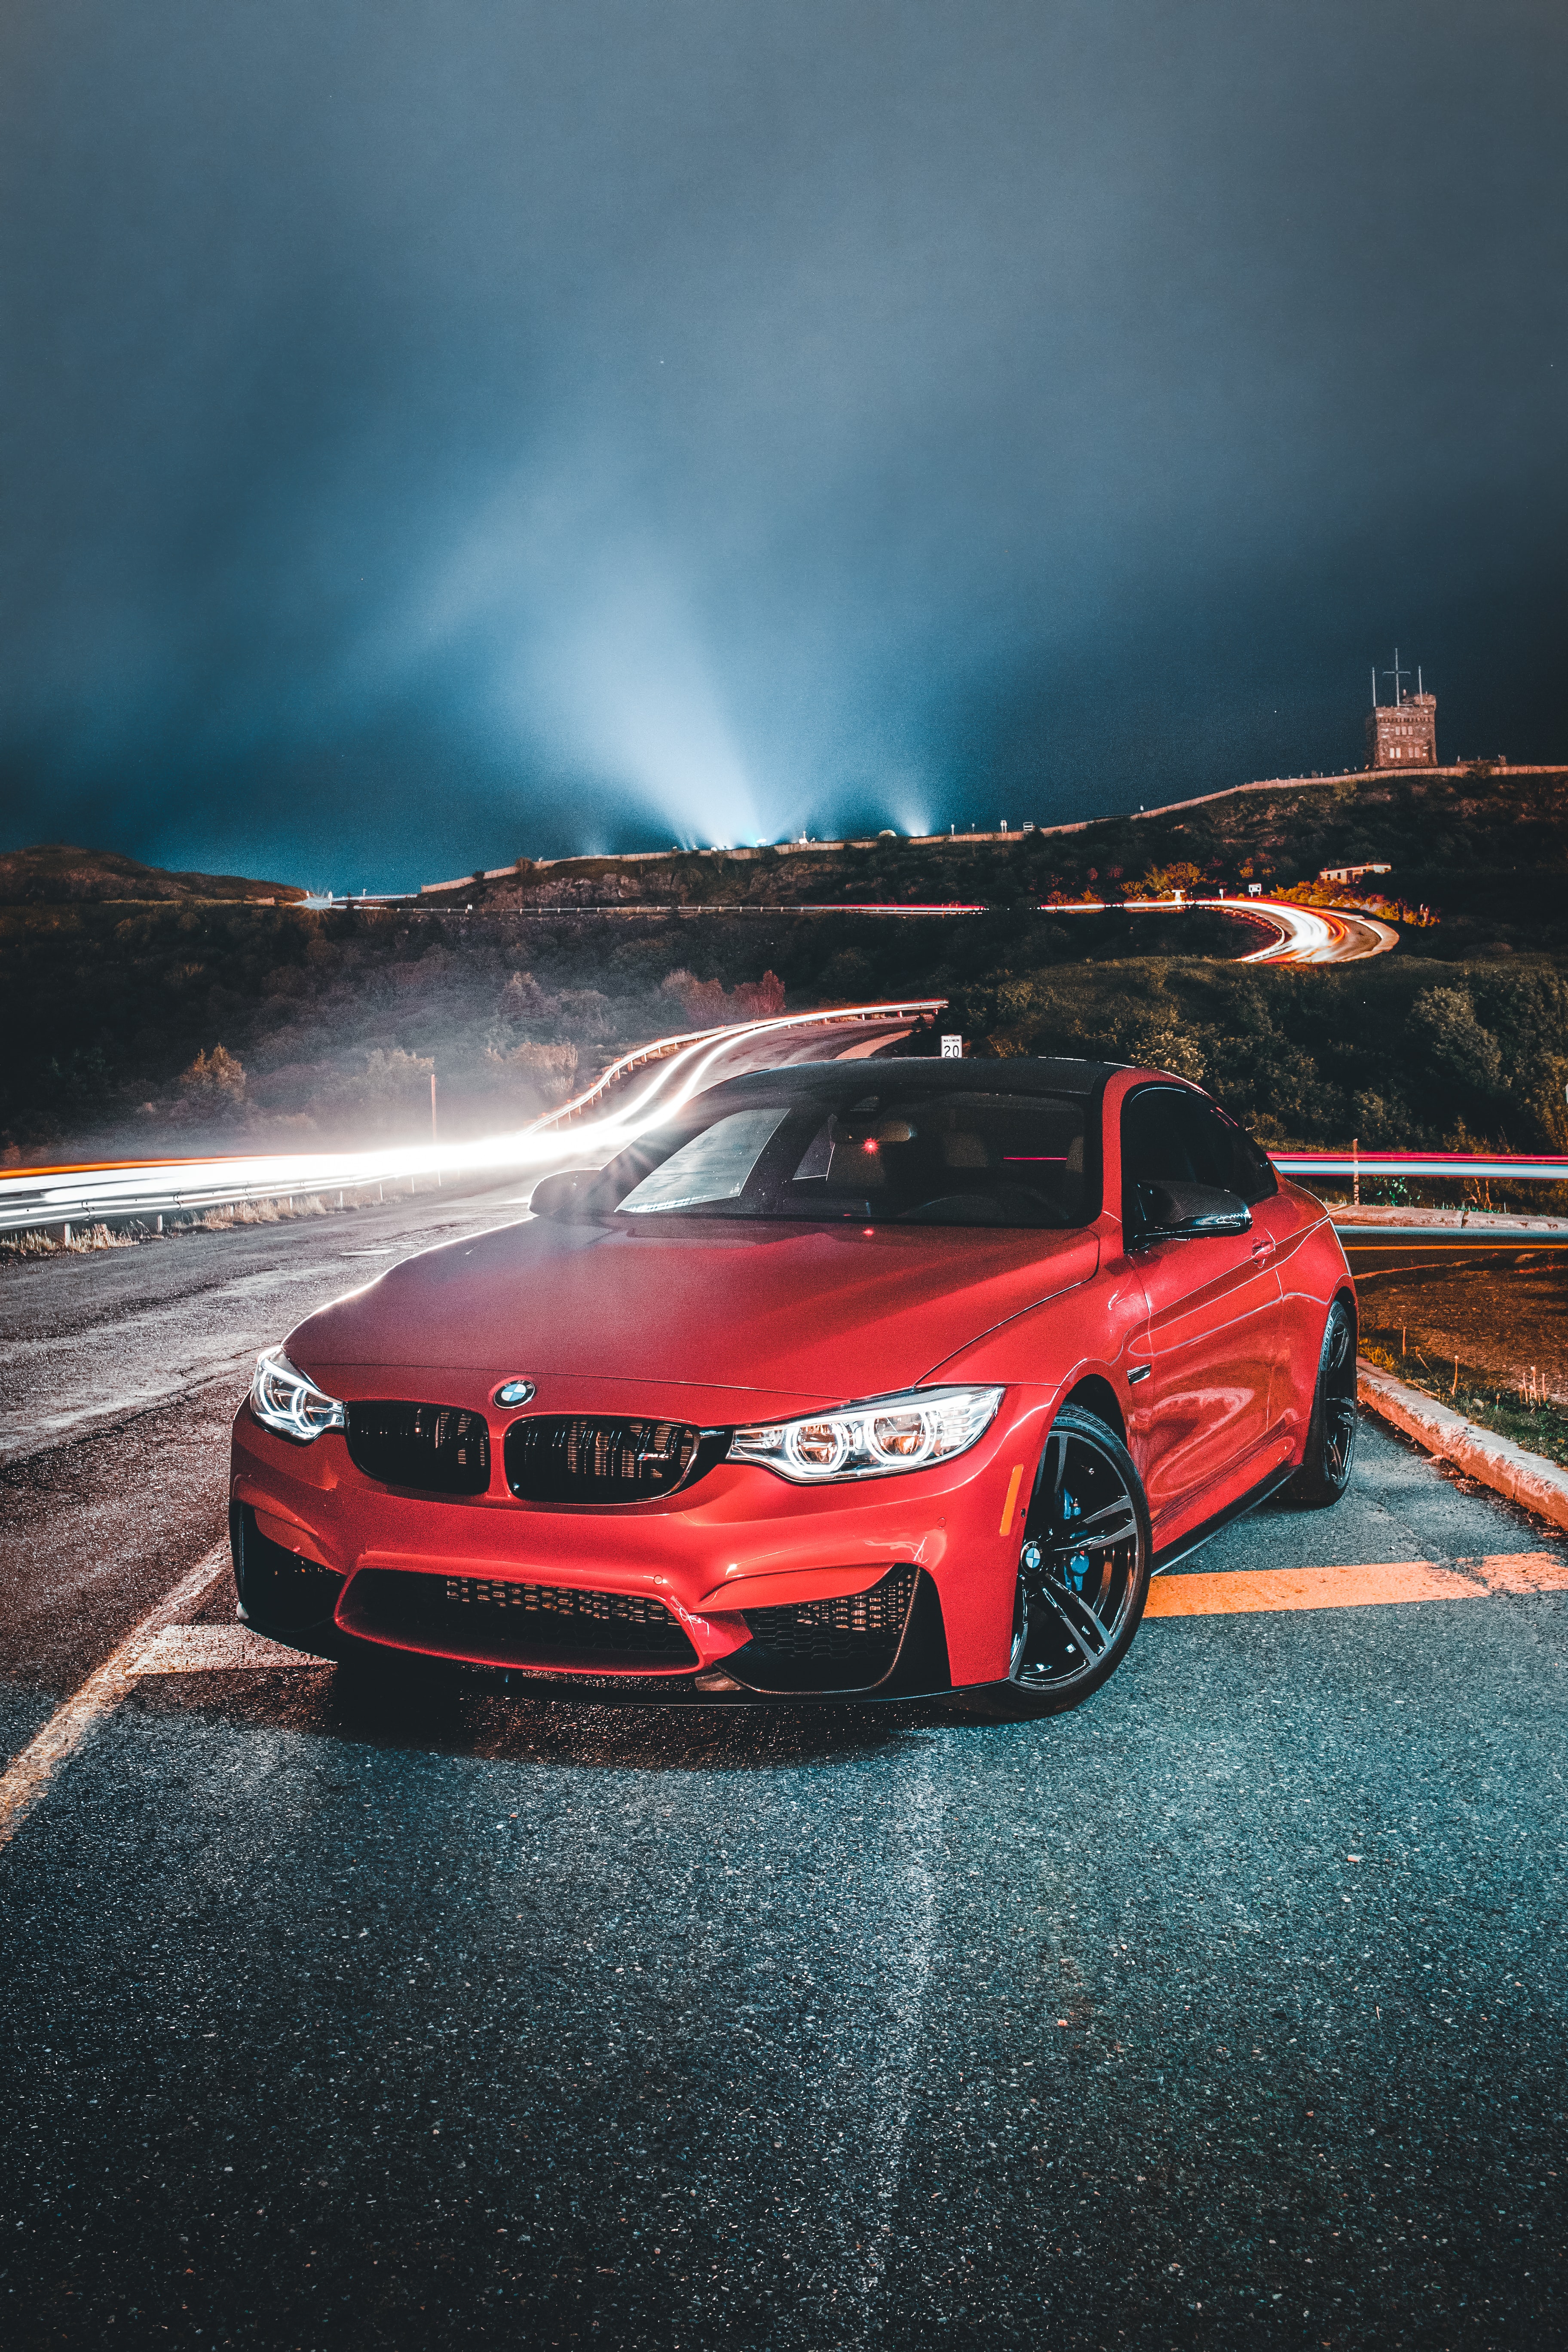 bmw 320i, bmw, machine, front view, cars, red, road, car cellphone